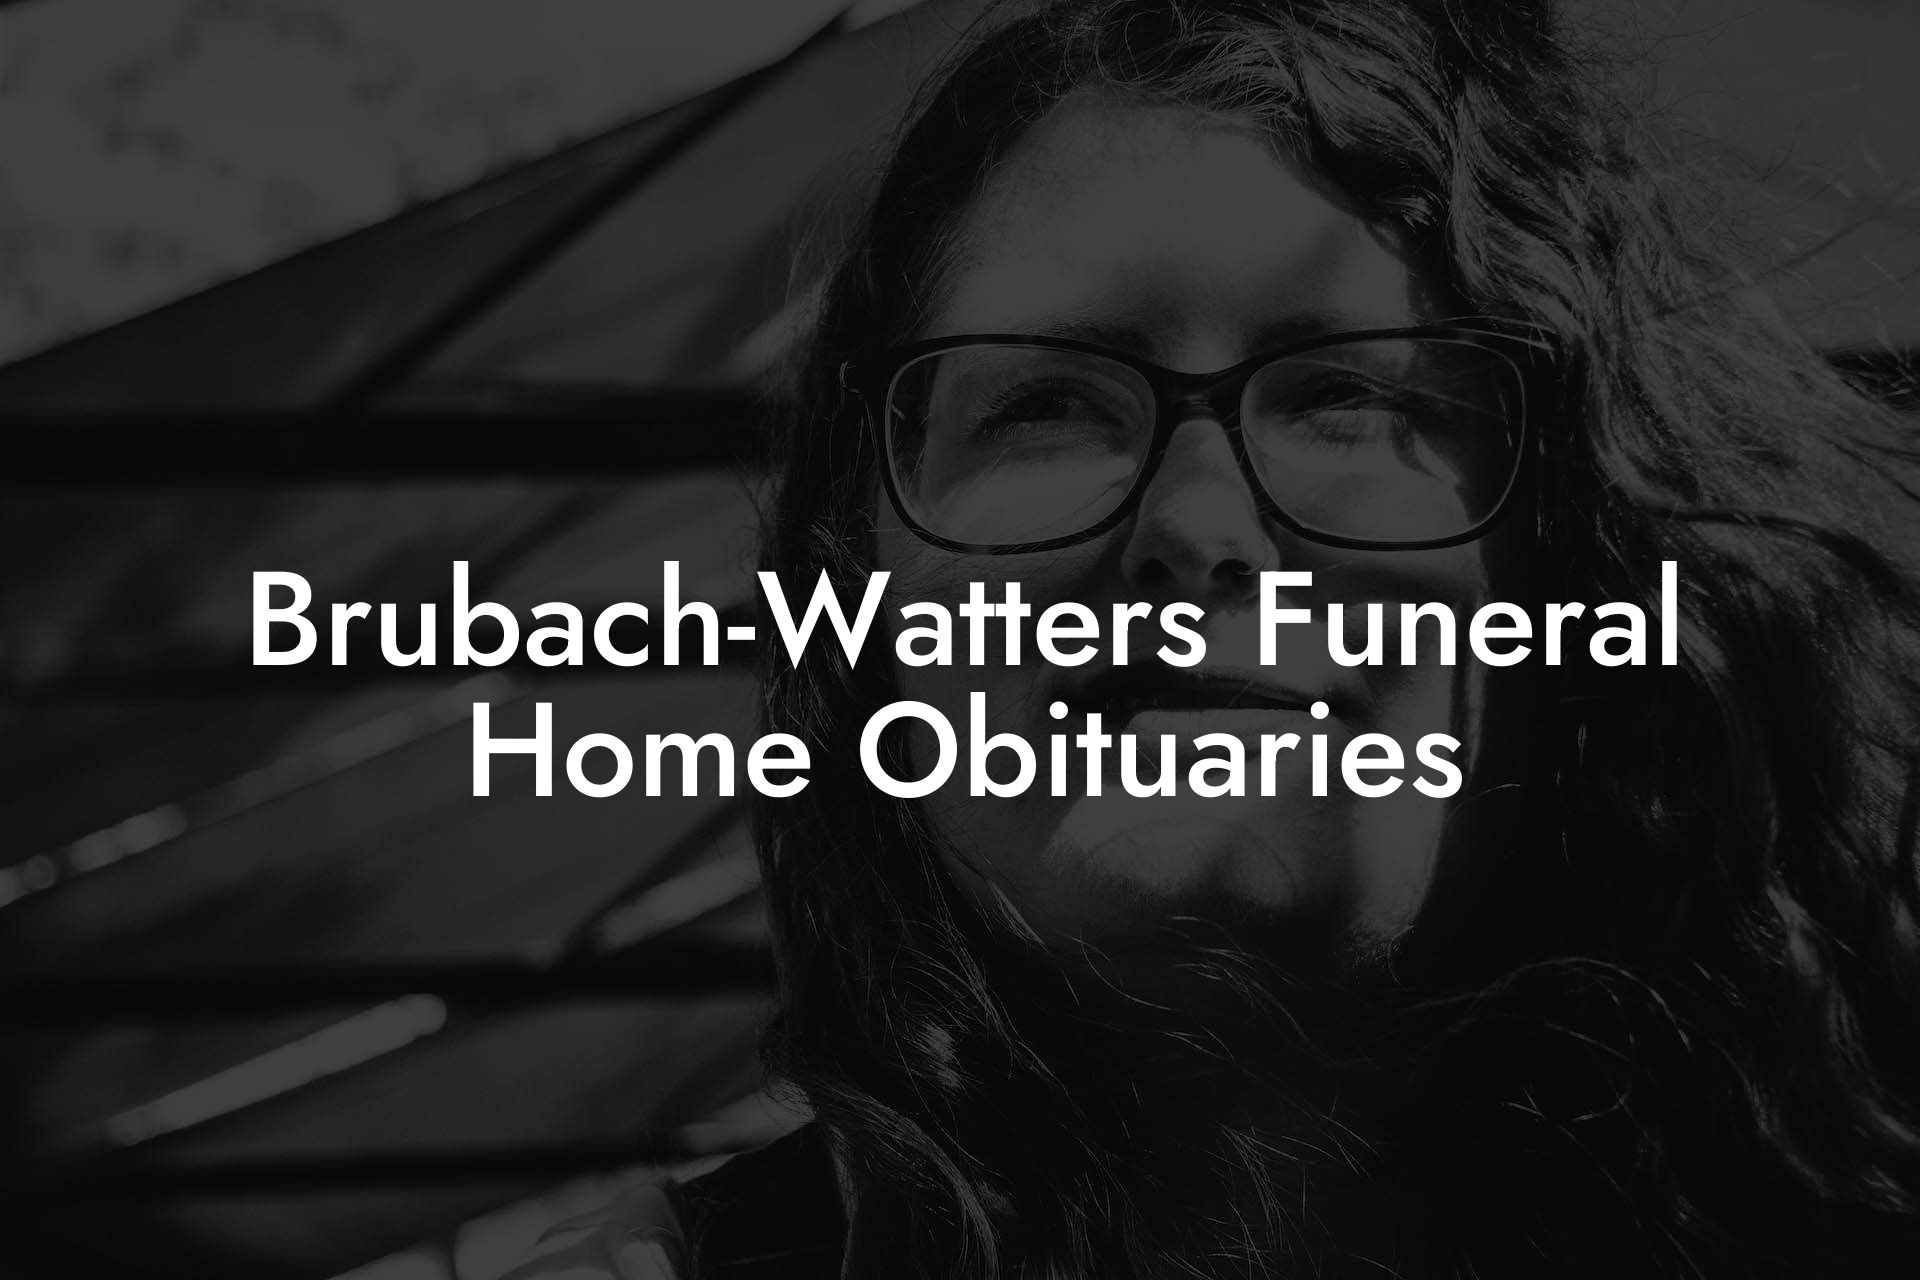 Brubach-Watters Funeral Home Obituaries